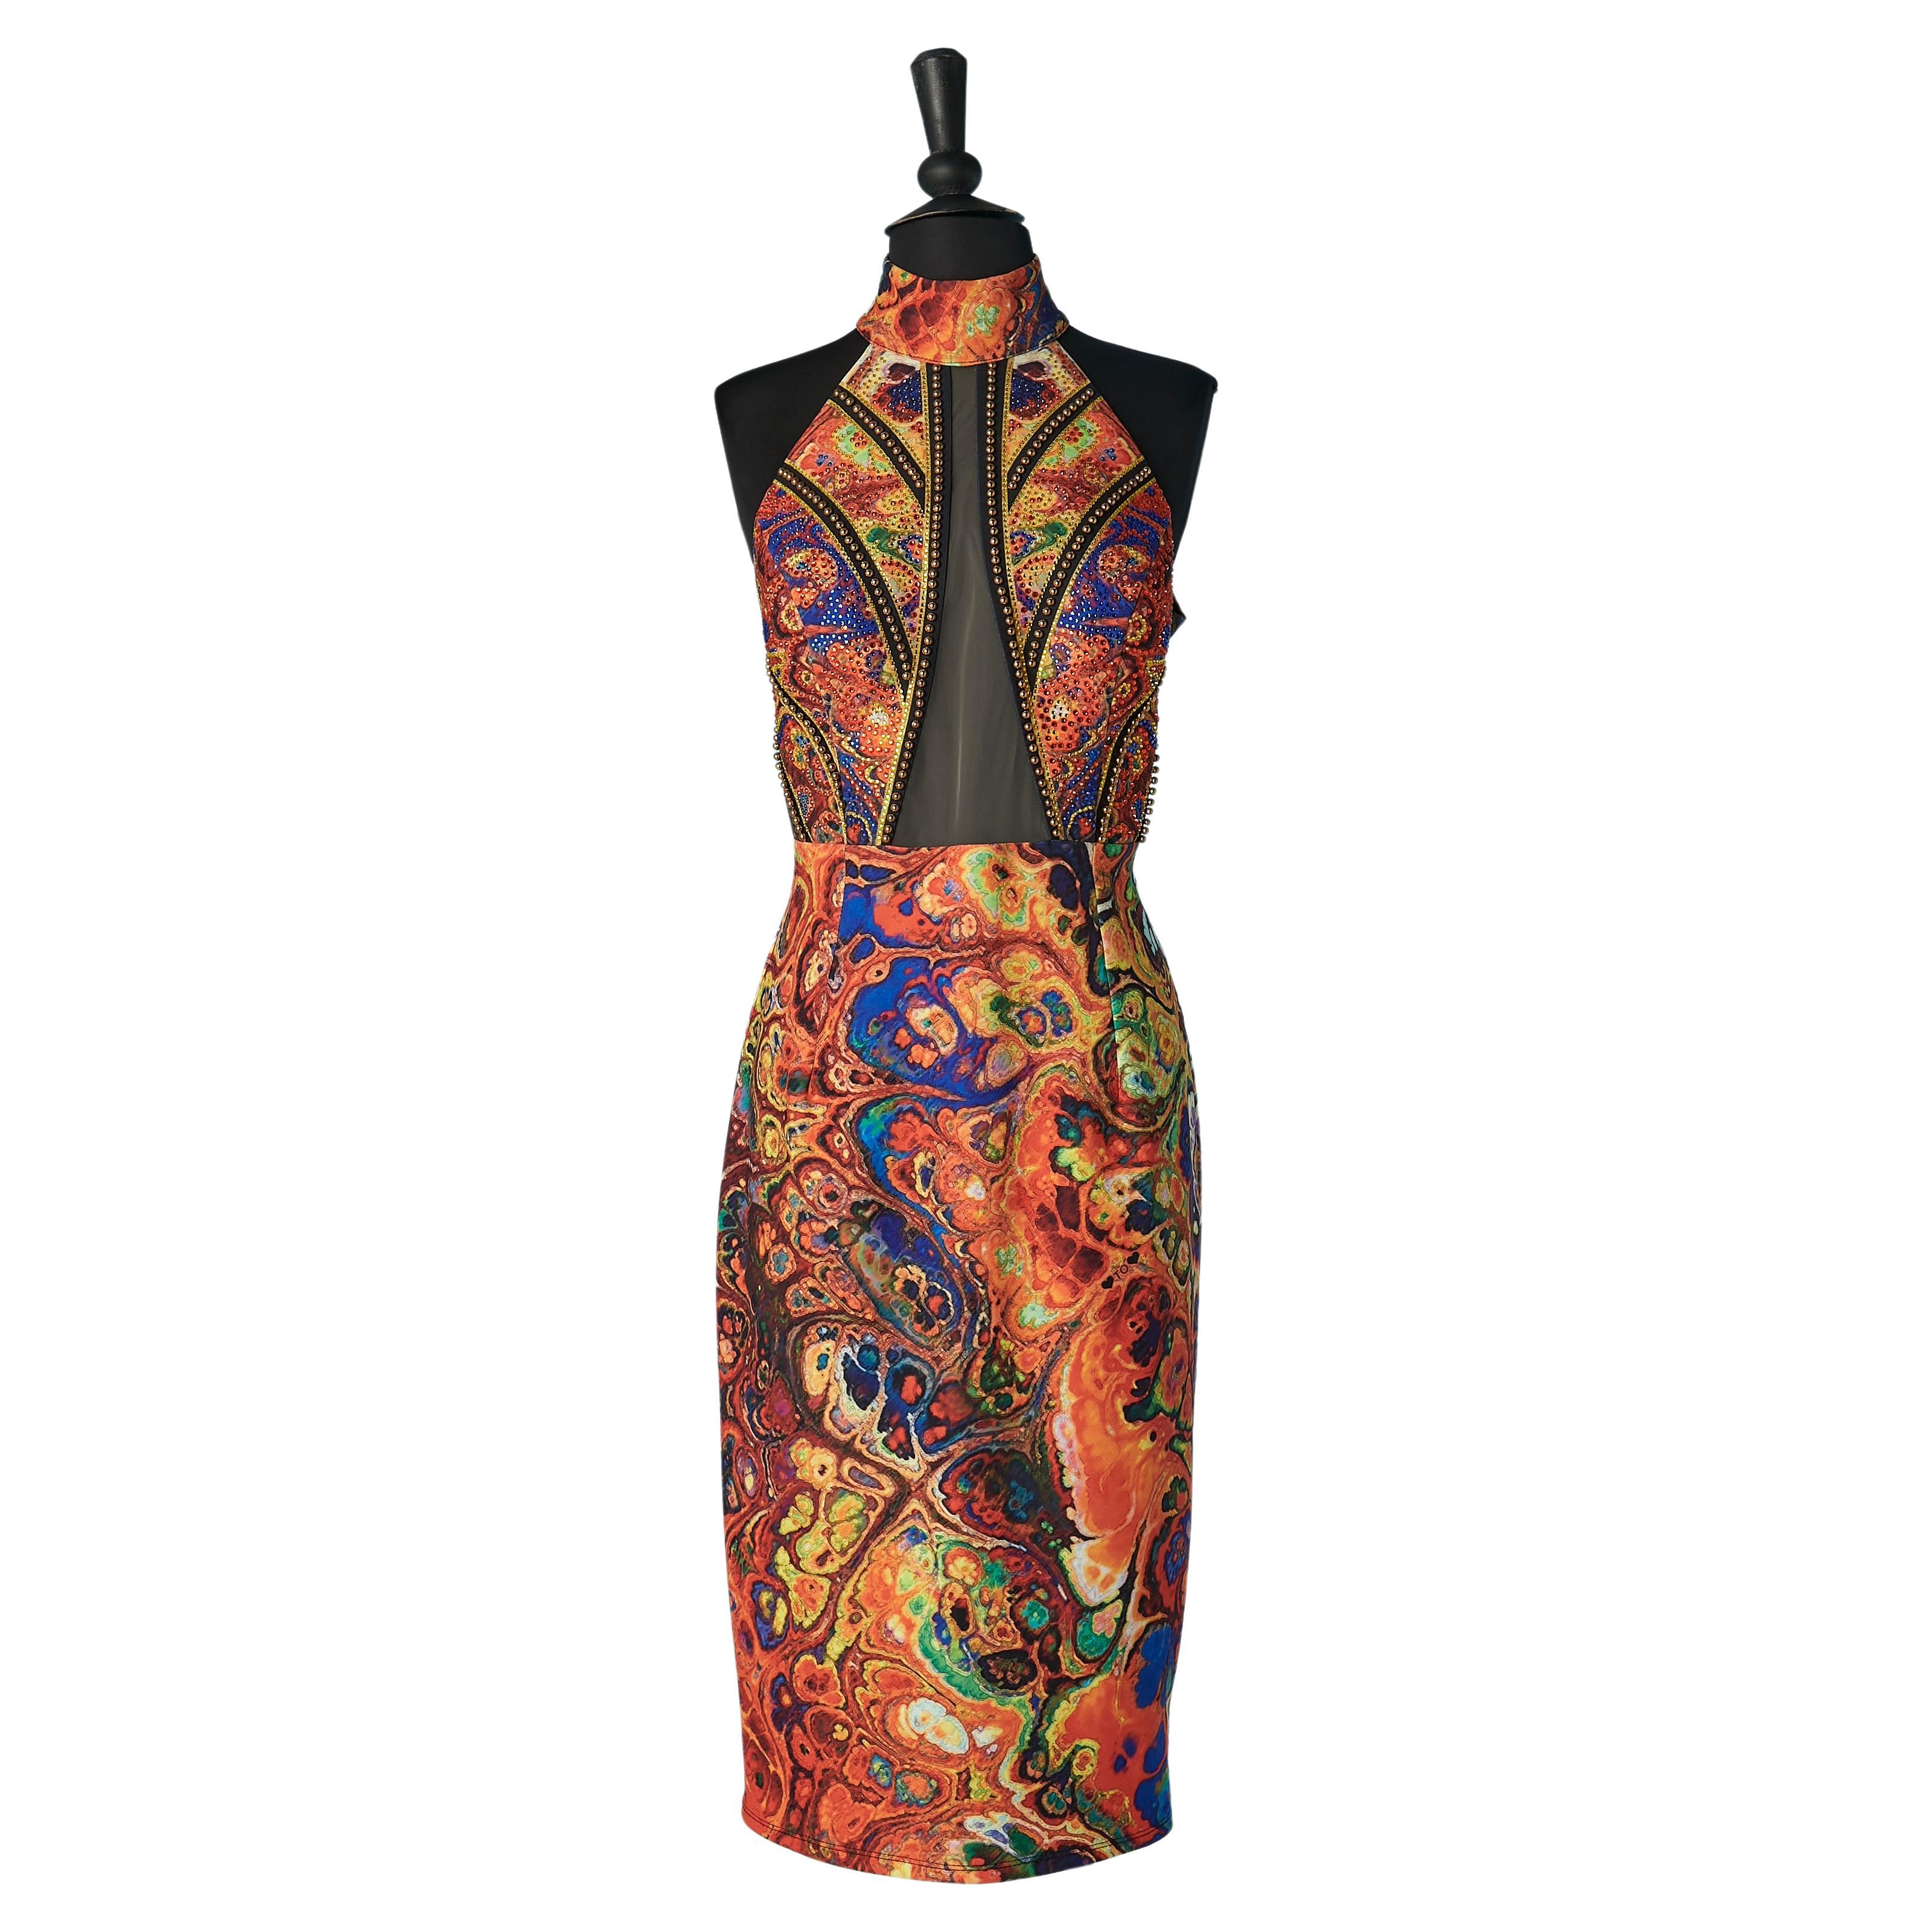 Printed  cocktail dress with beads and rhinestone embellishement Gai Mattiolo  For Sale